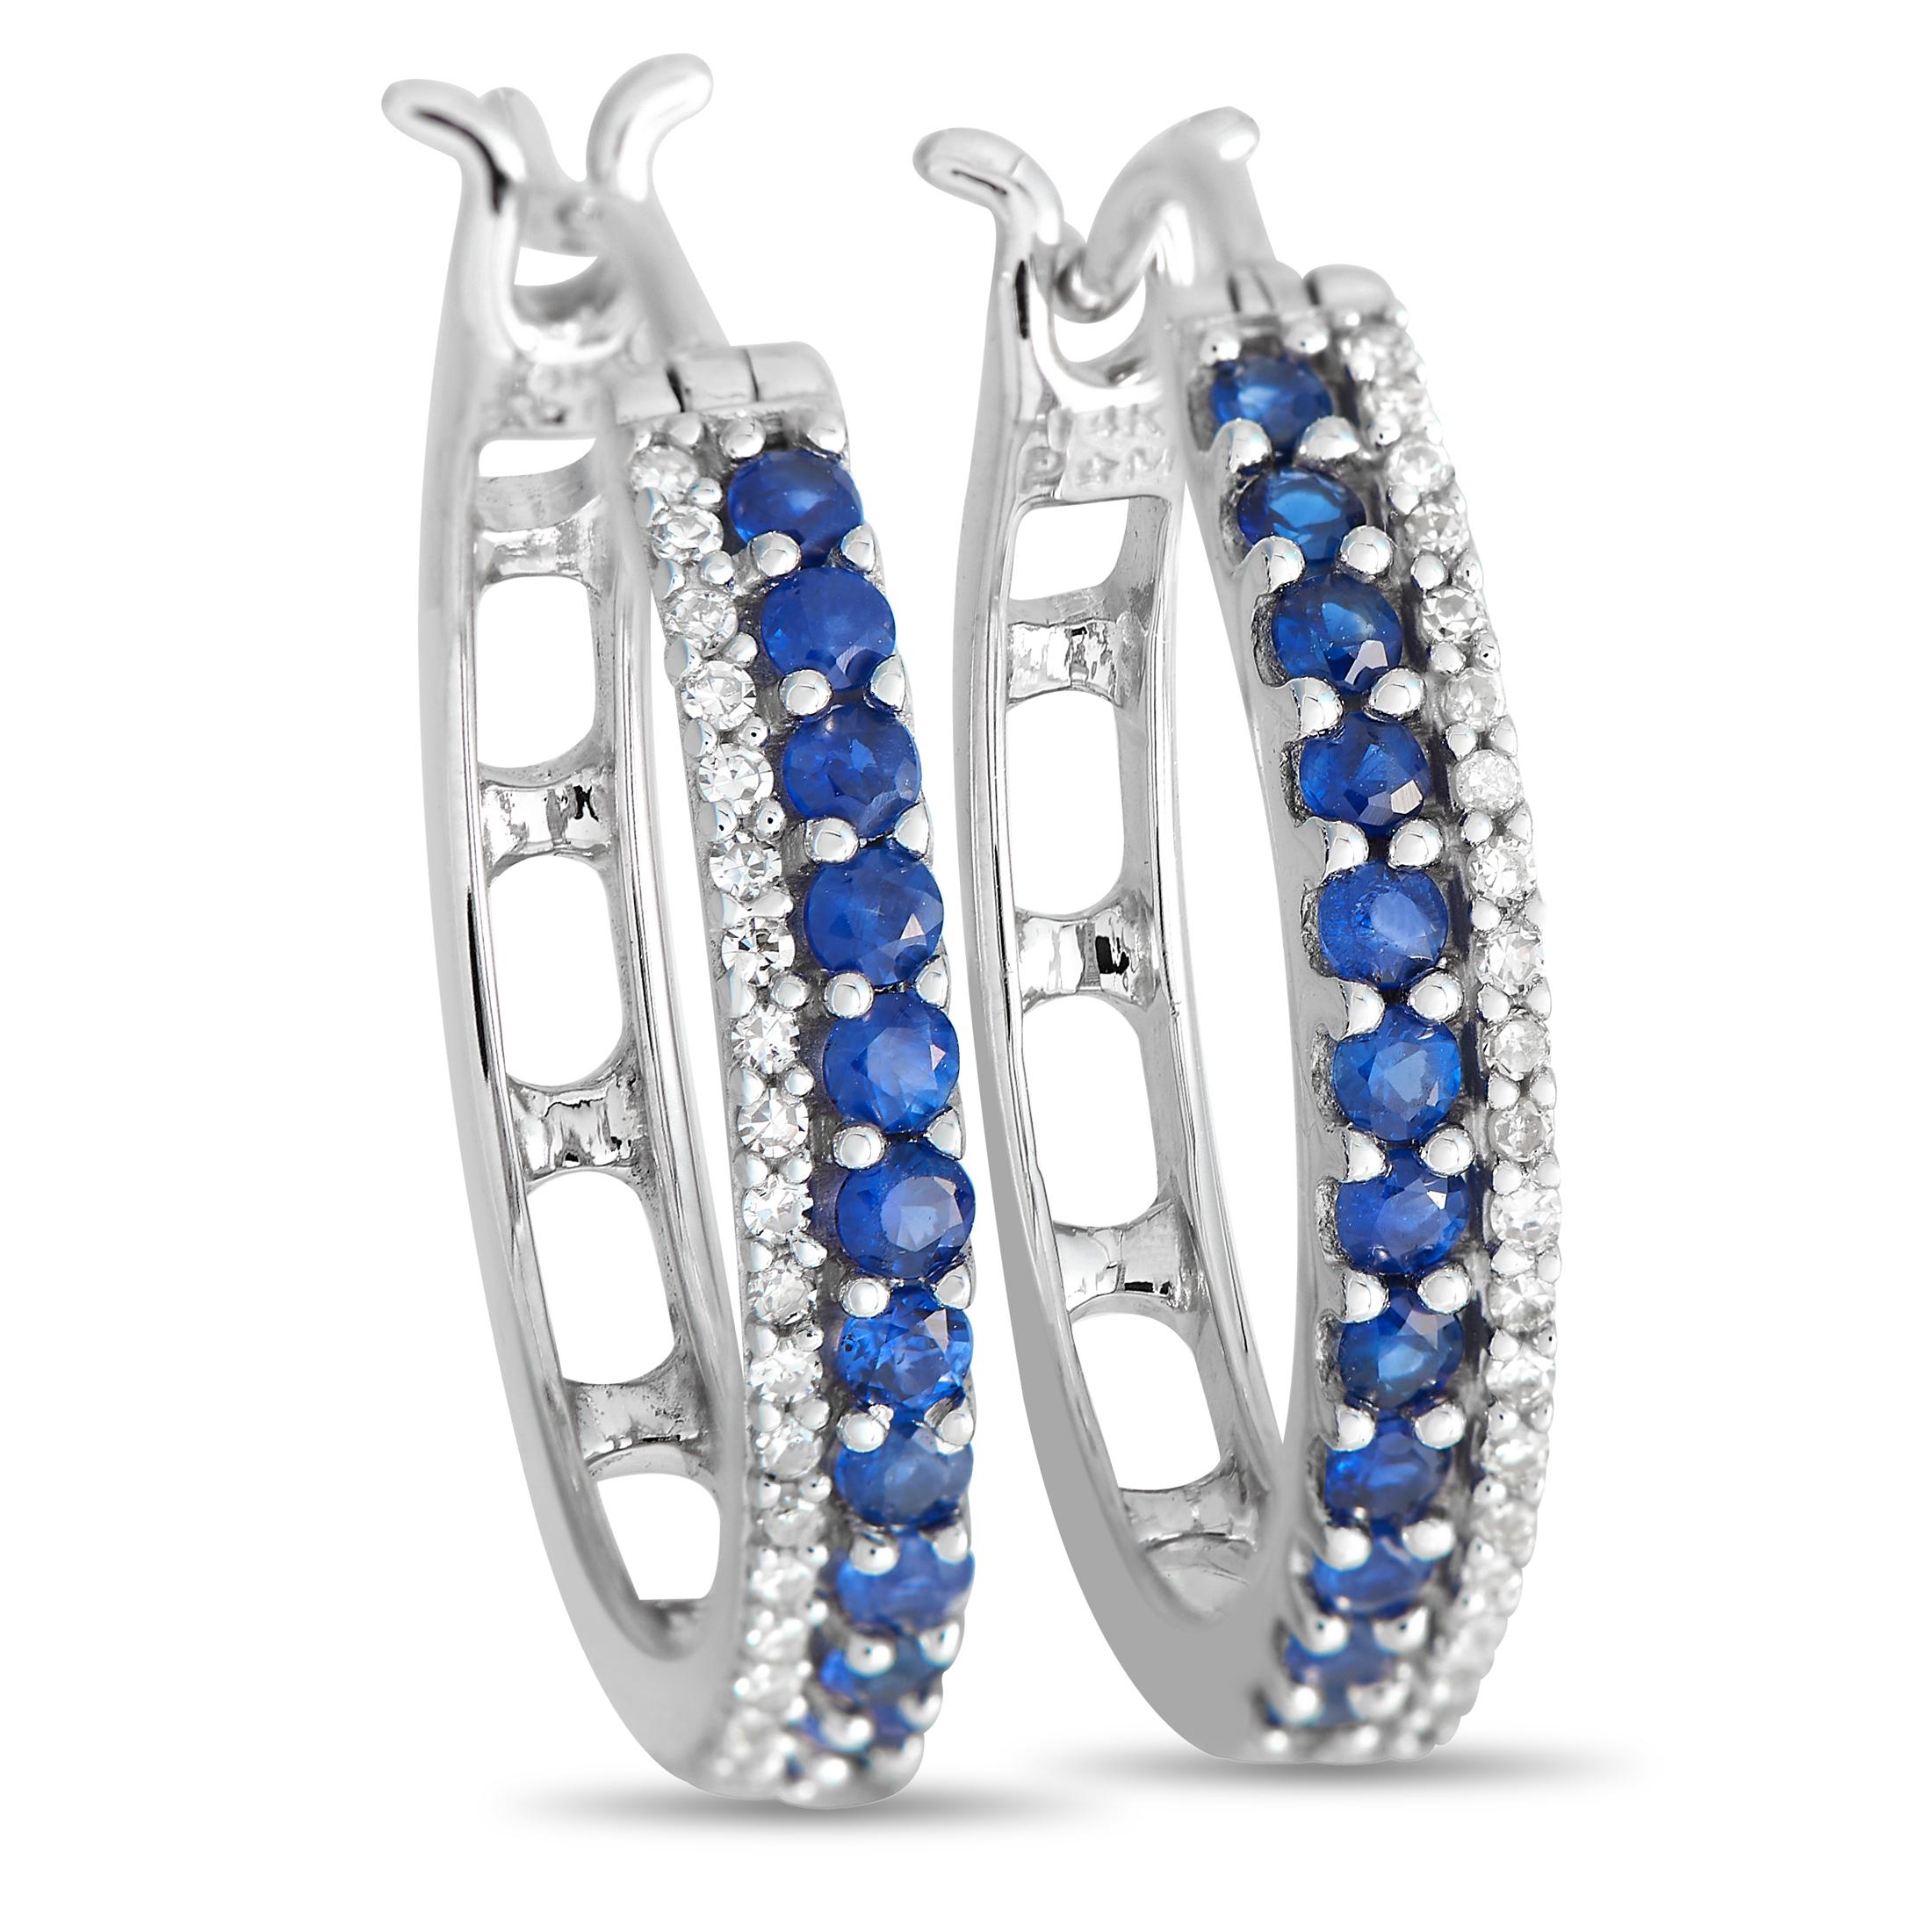 14K White Gold 0.15ct Diamond and Blue Sapphire Hoop Earrings ER28312 In New Condition For Sale In Southampton, PA